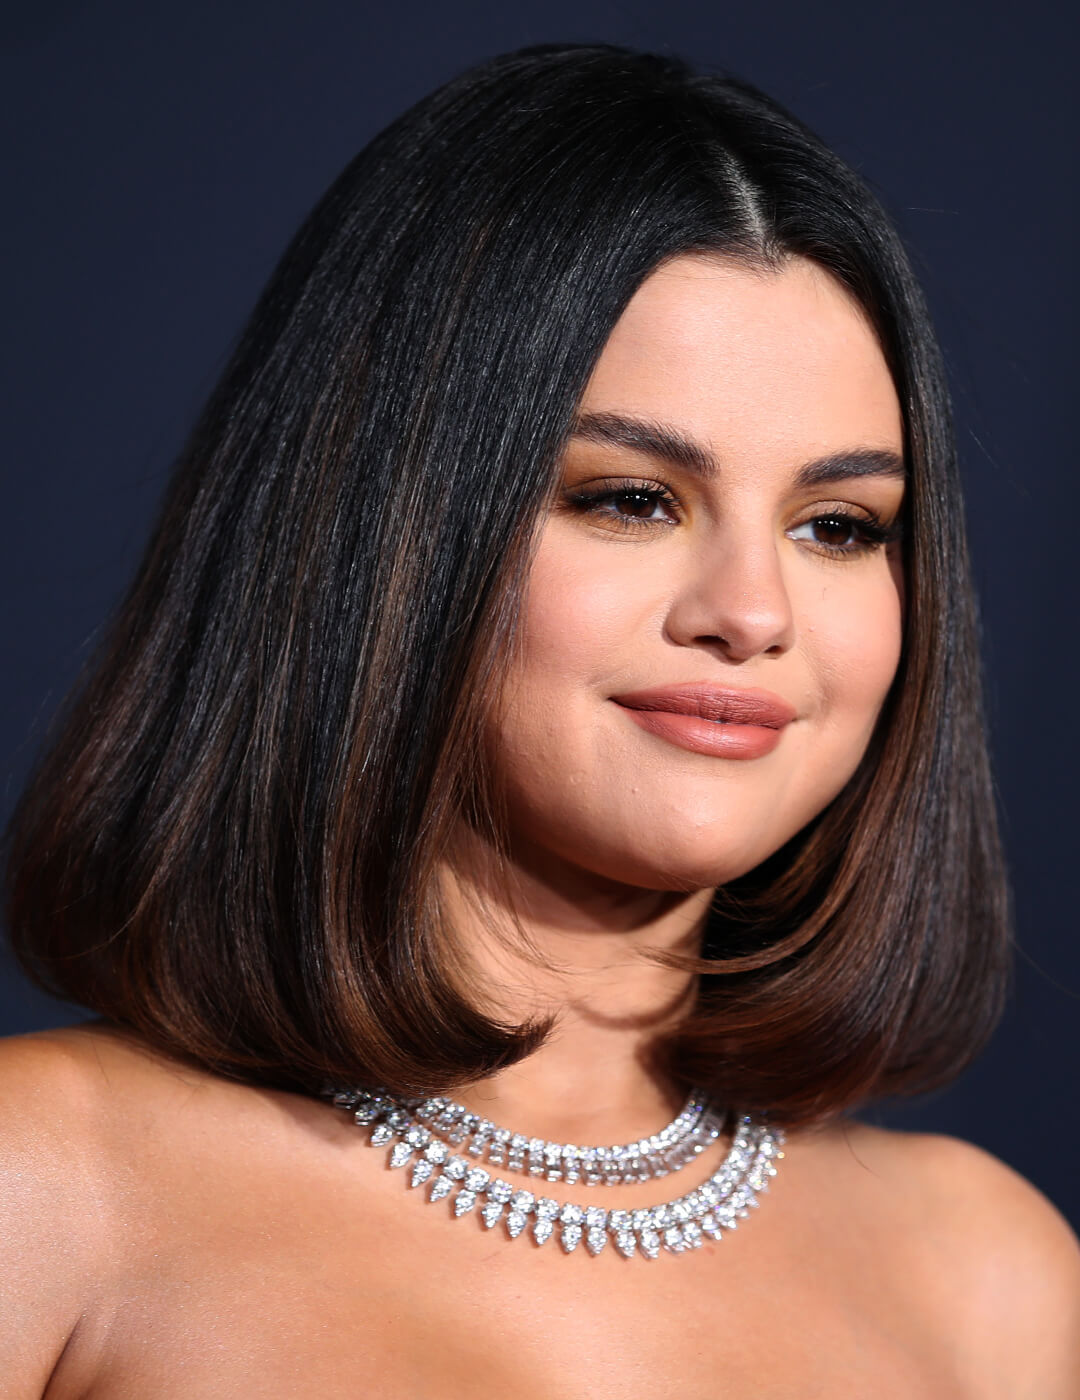 Selena Gomez smiling and rocking a blowout bob hairstyle